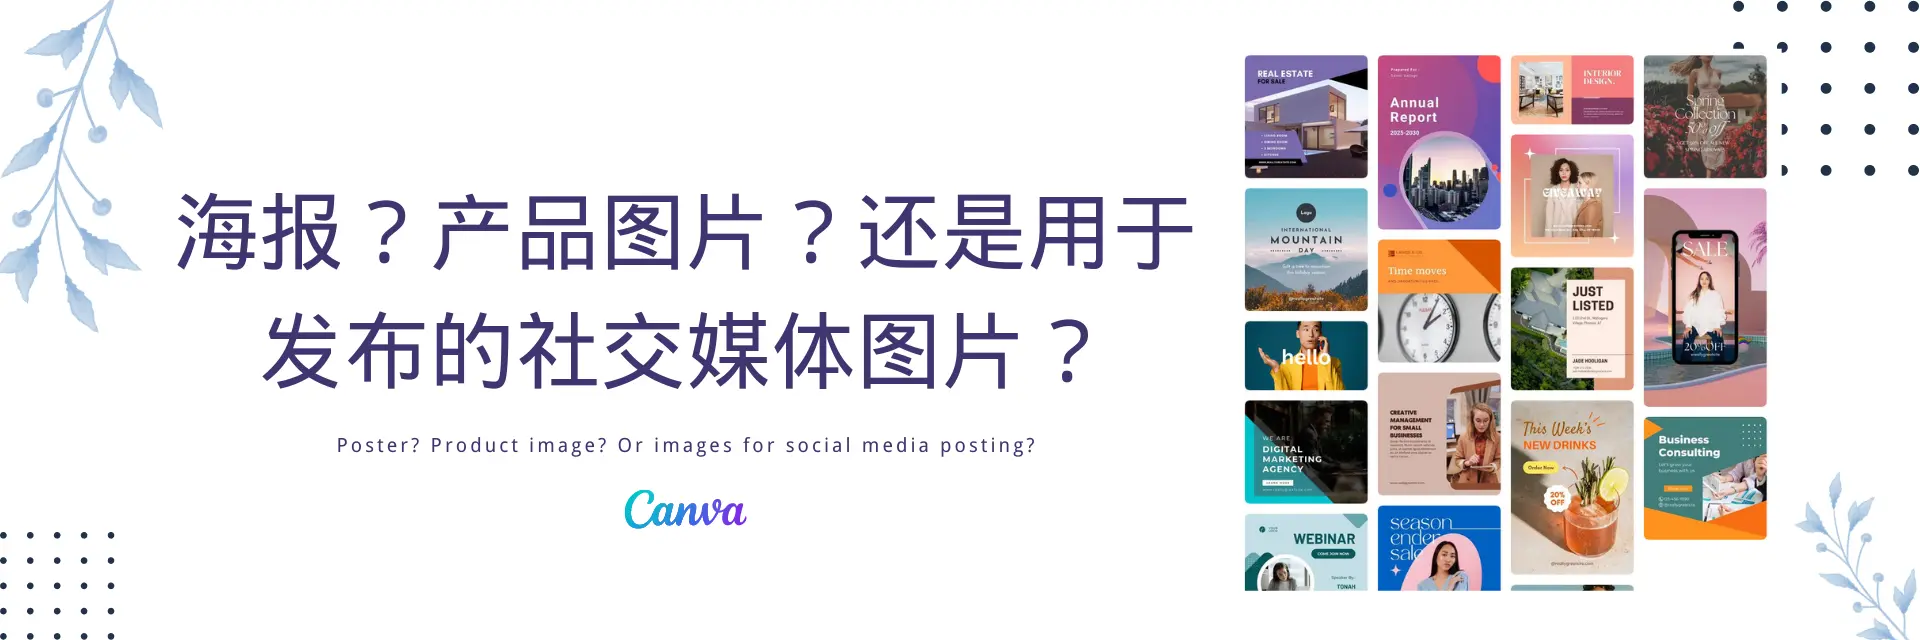 Canva page cover image (2)